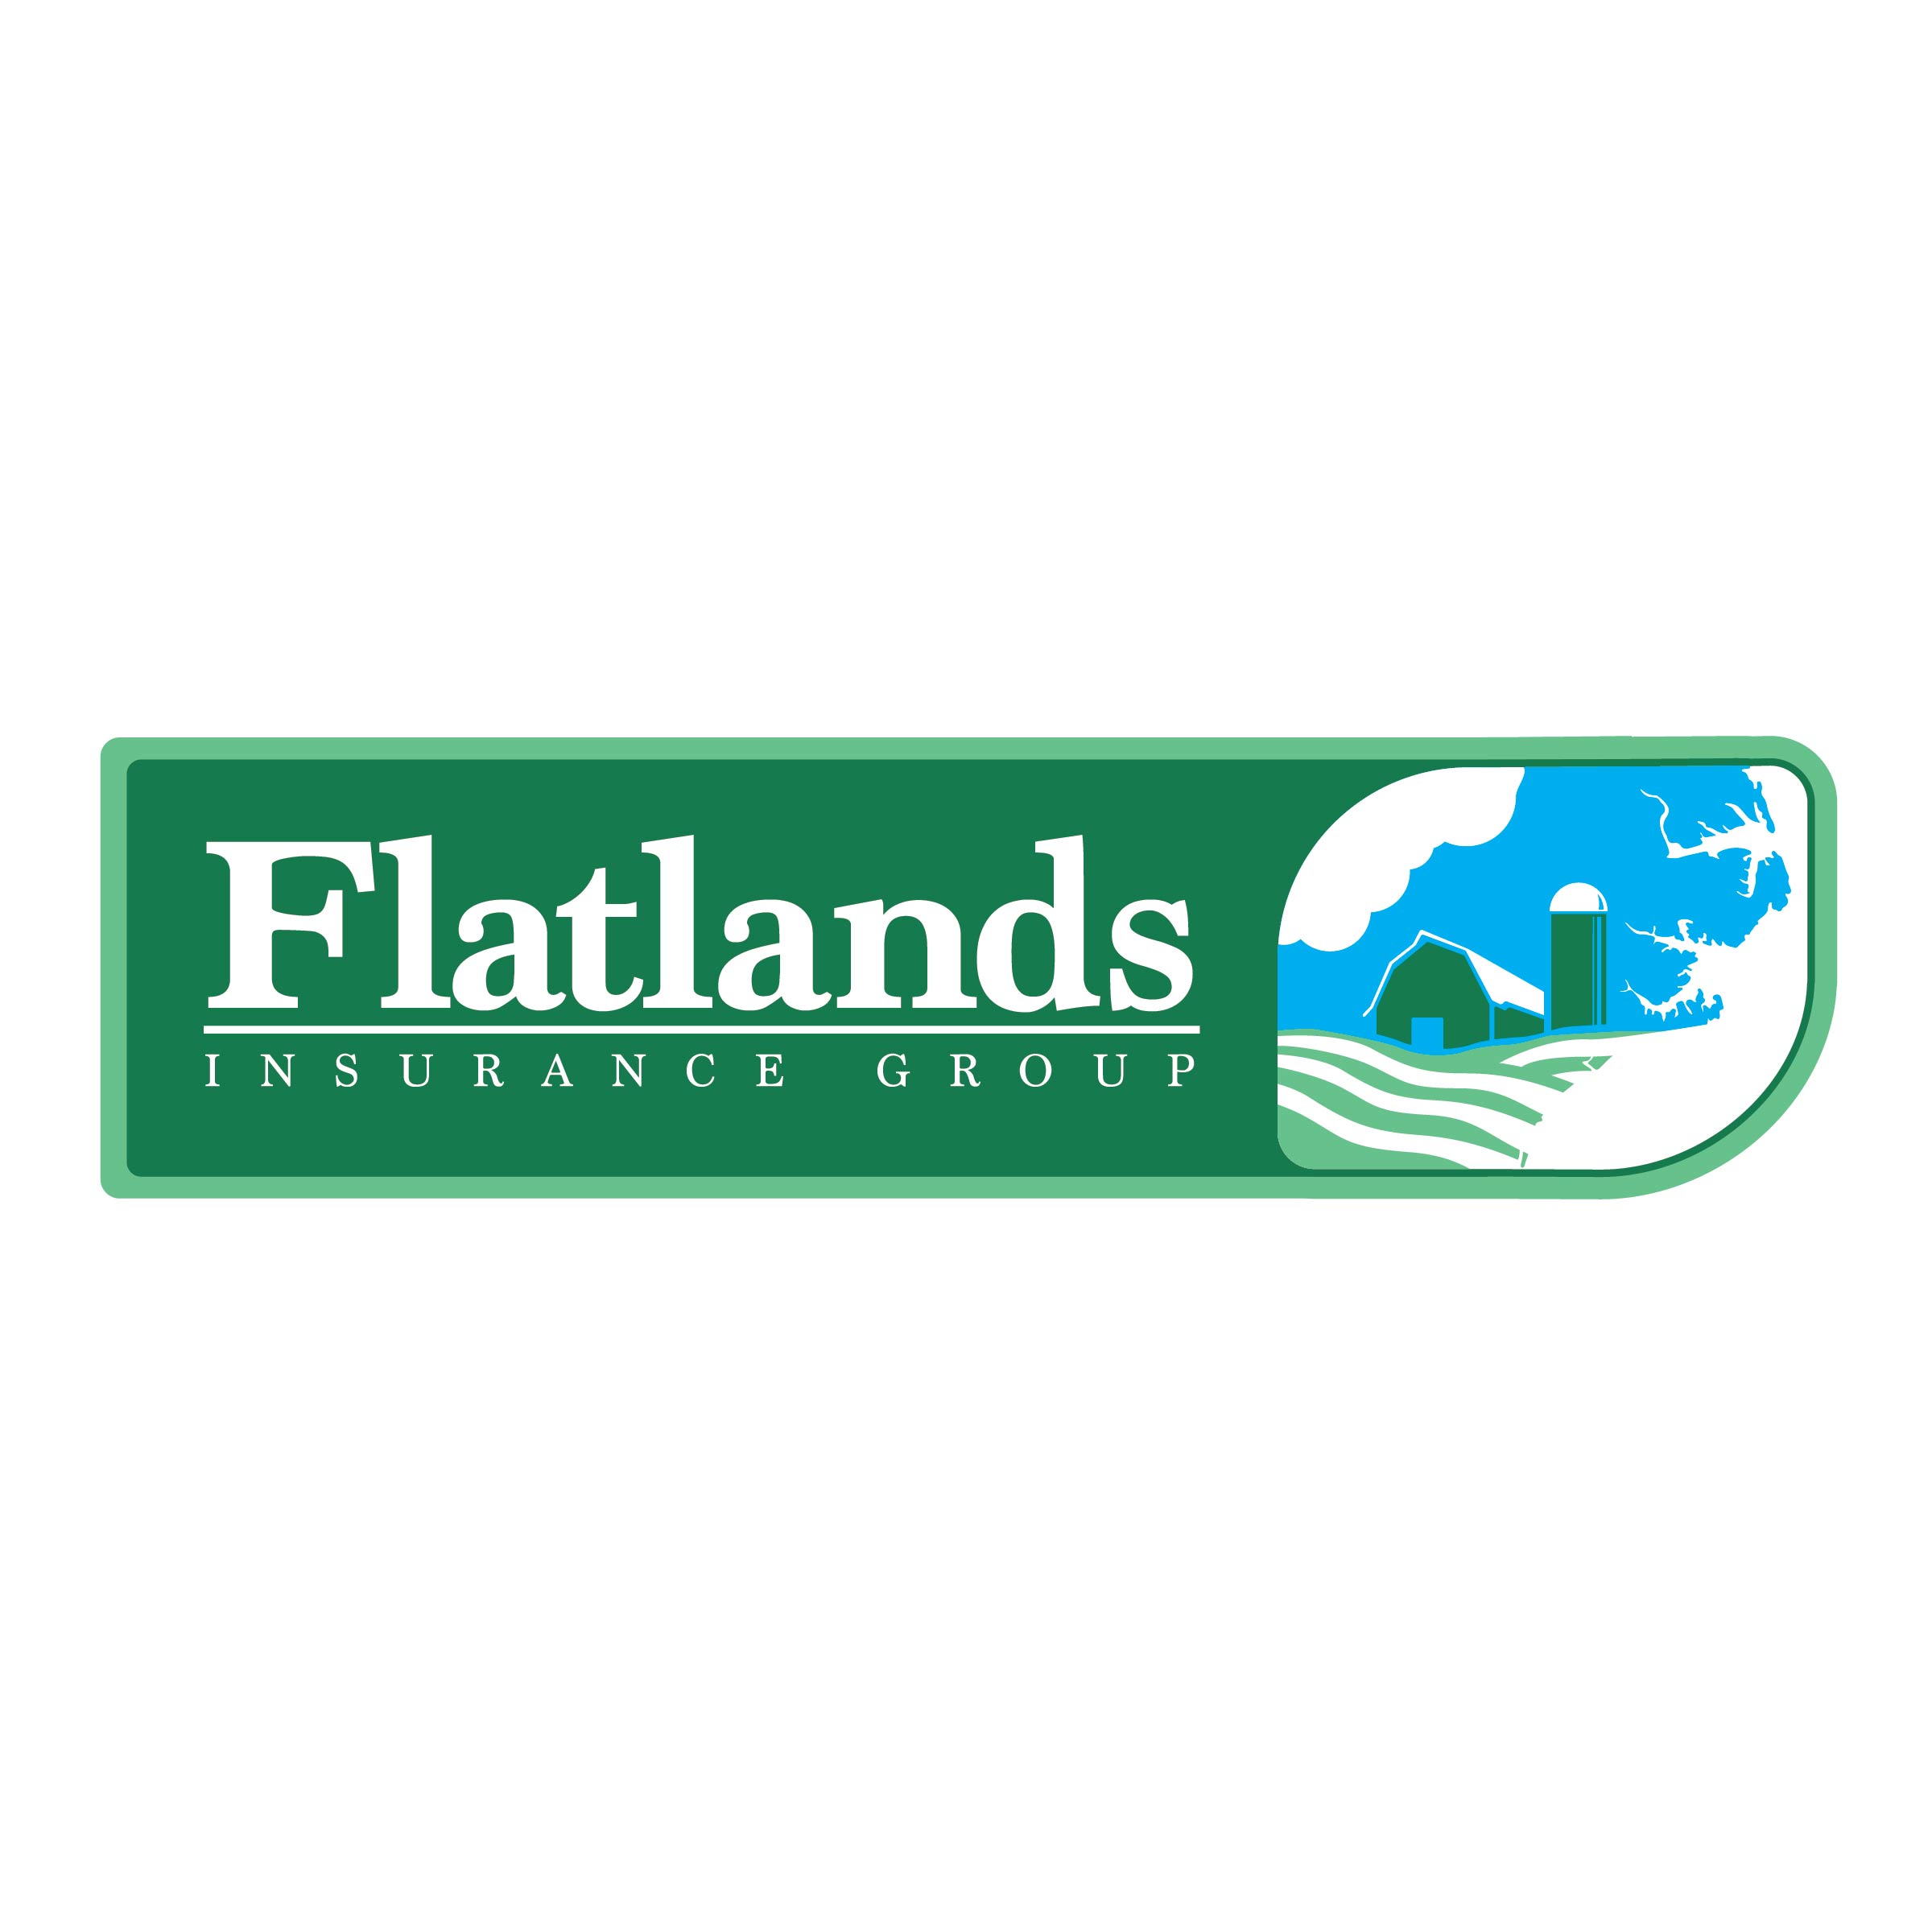 Flatlands Jessup Insurance Group - Booth #441